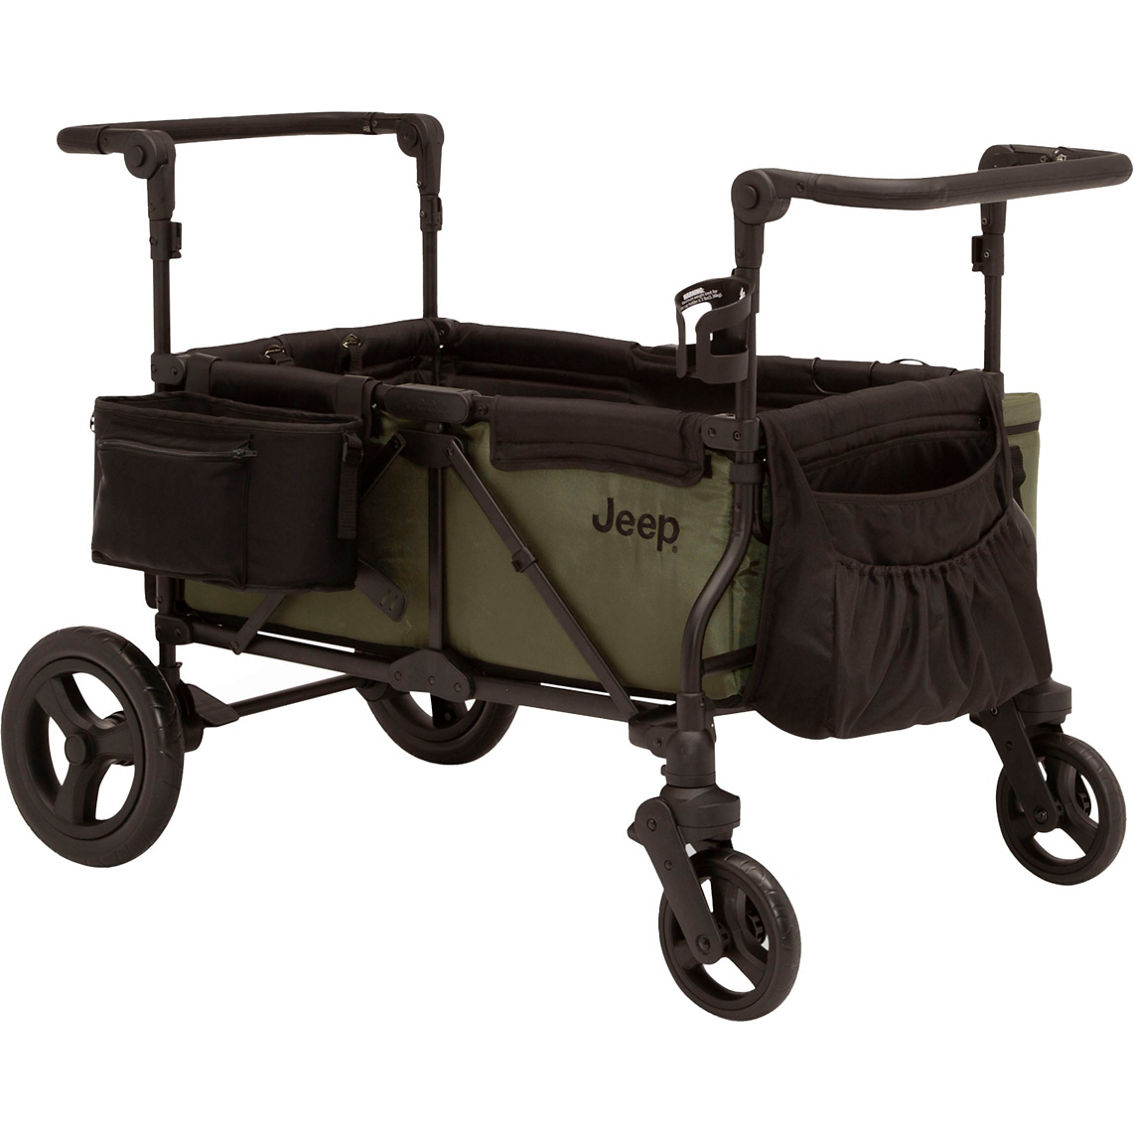 Jeep Deluxe Wrangler Wagon Stroller with Cooler Bag and Parent Organizer - Image 2 of 10